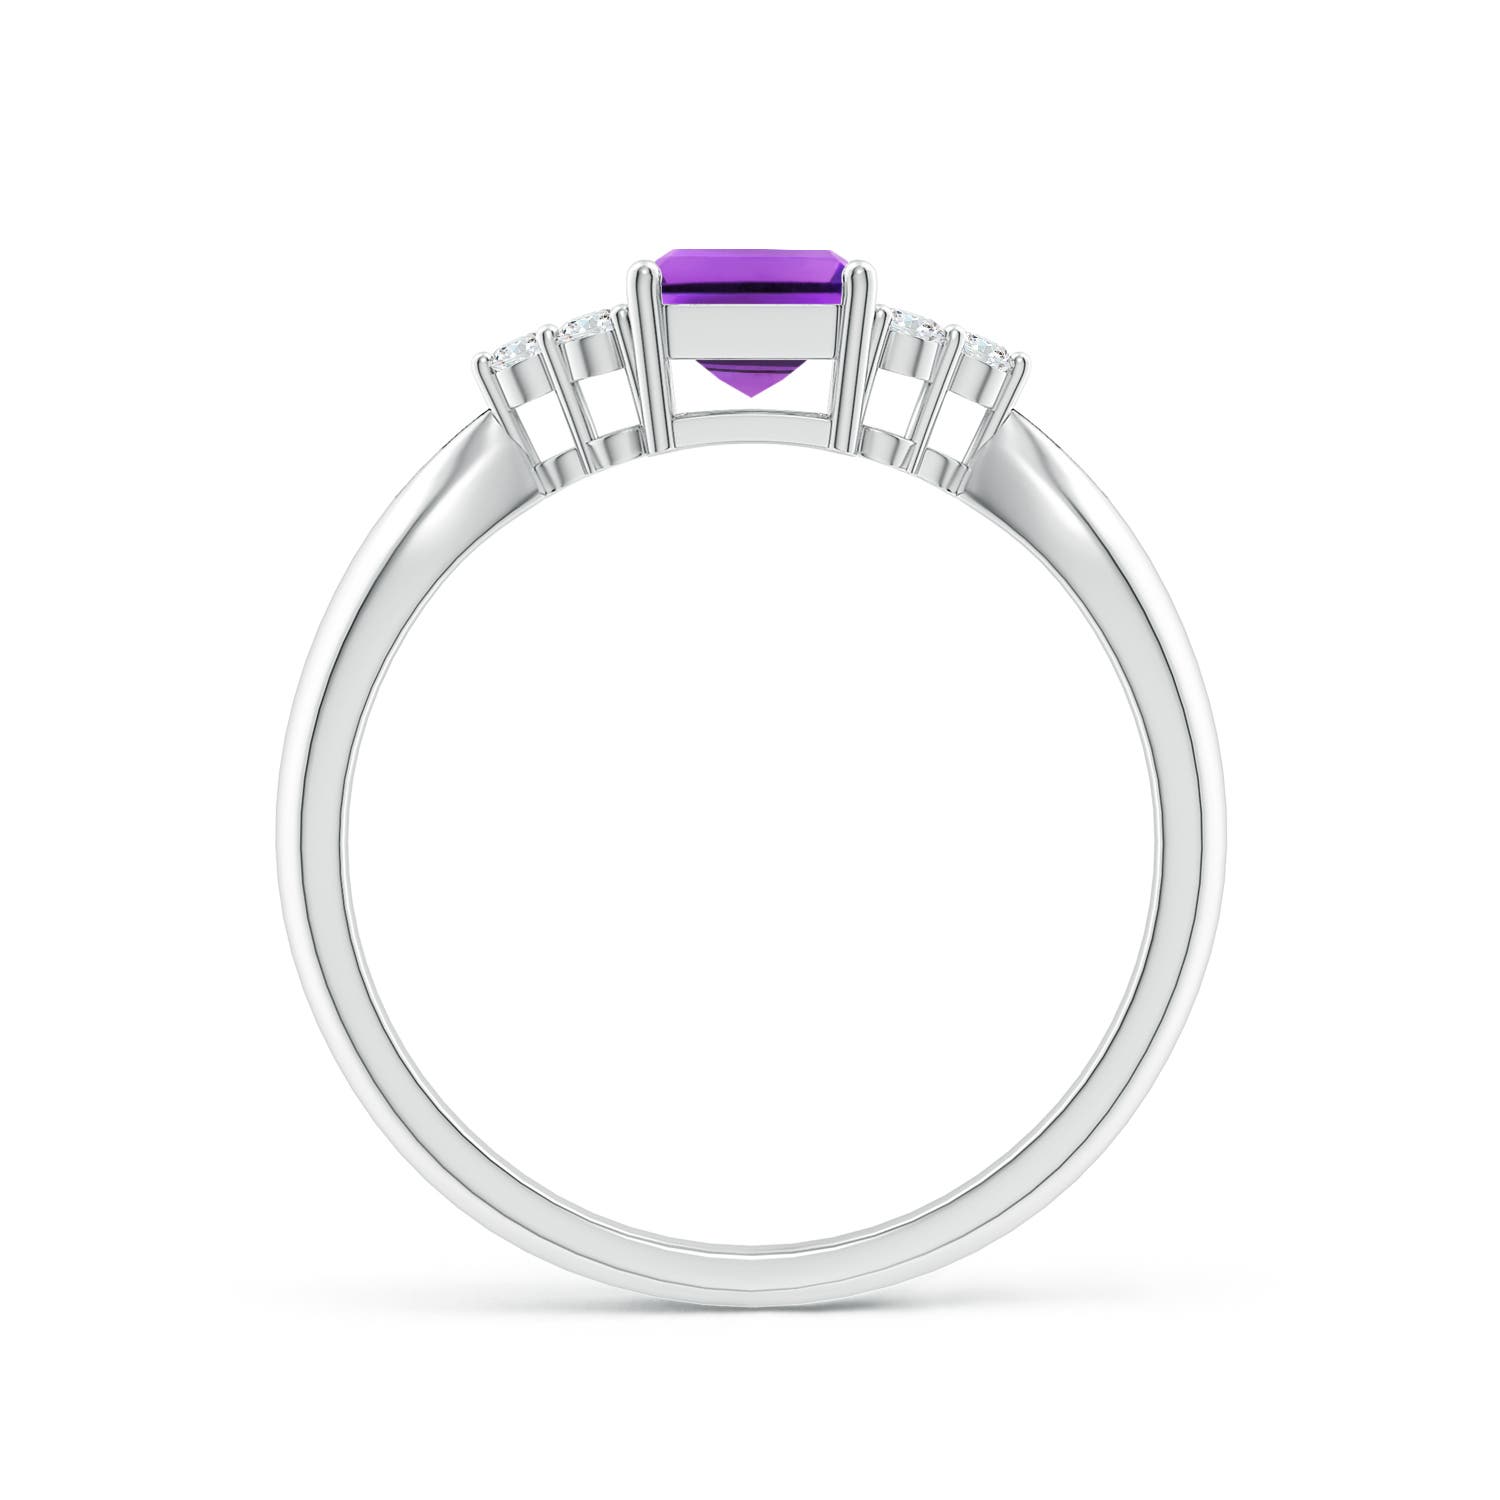 AAA - Amethyst / 1.07 CT / 14 KT White Gold